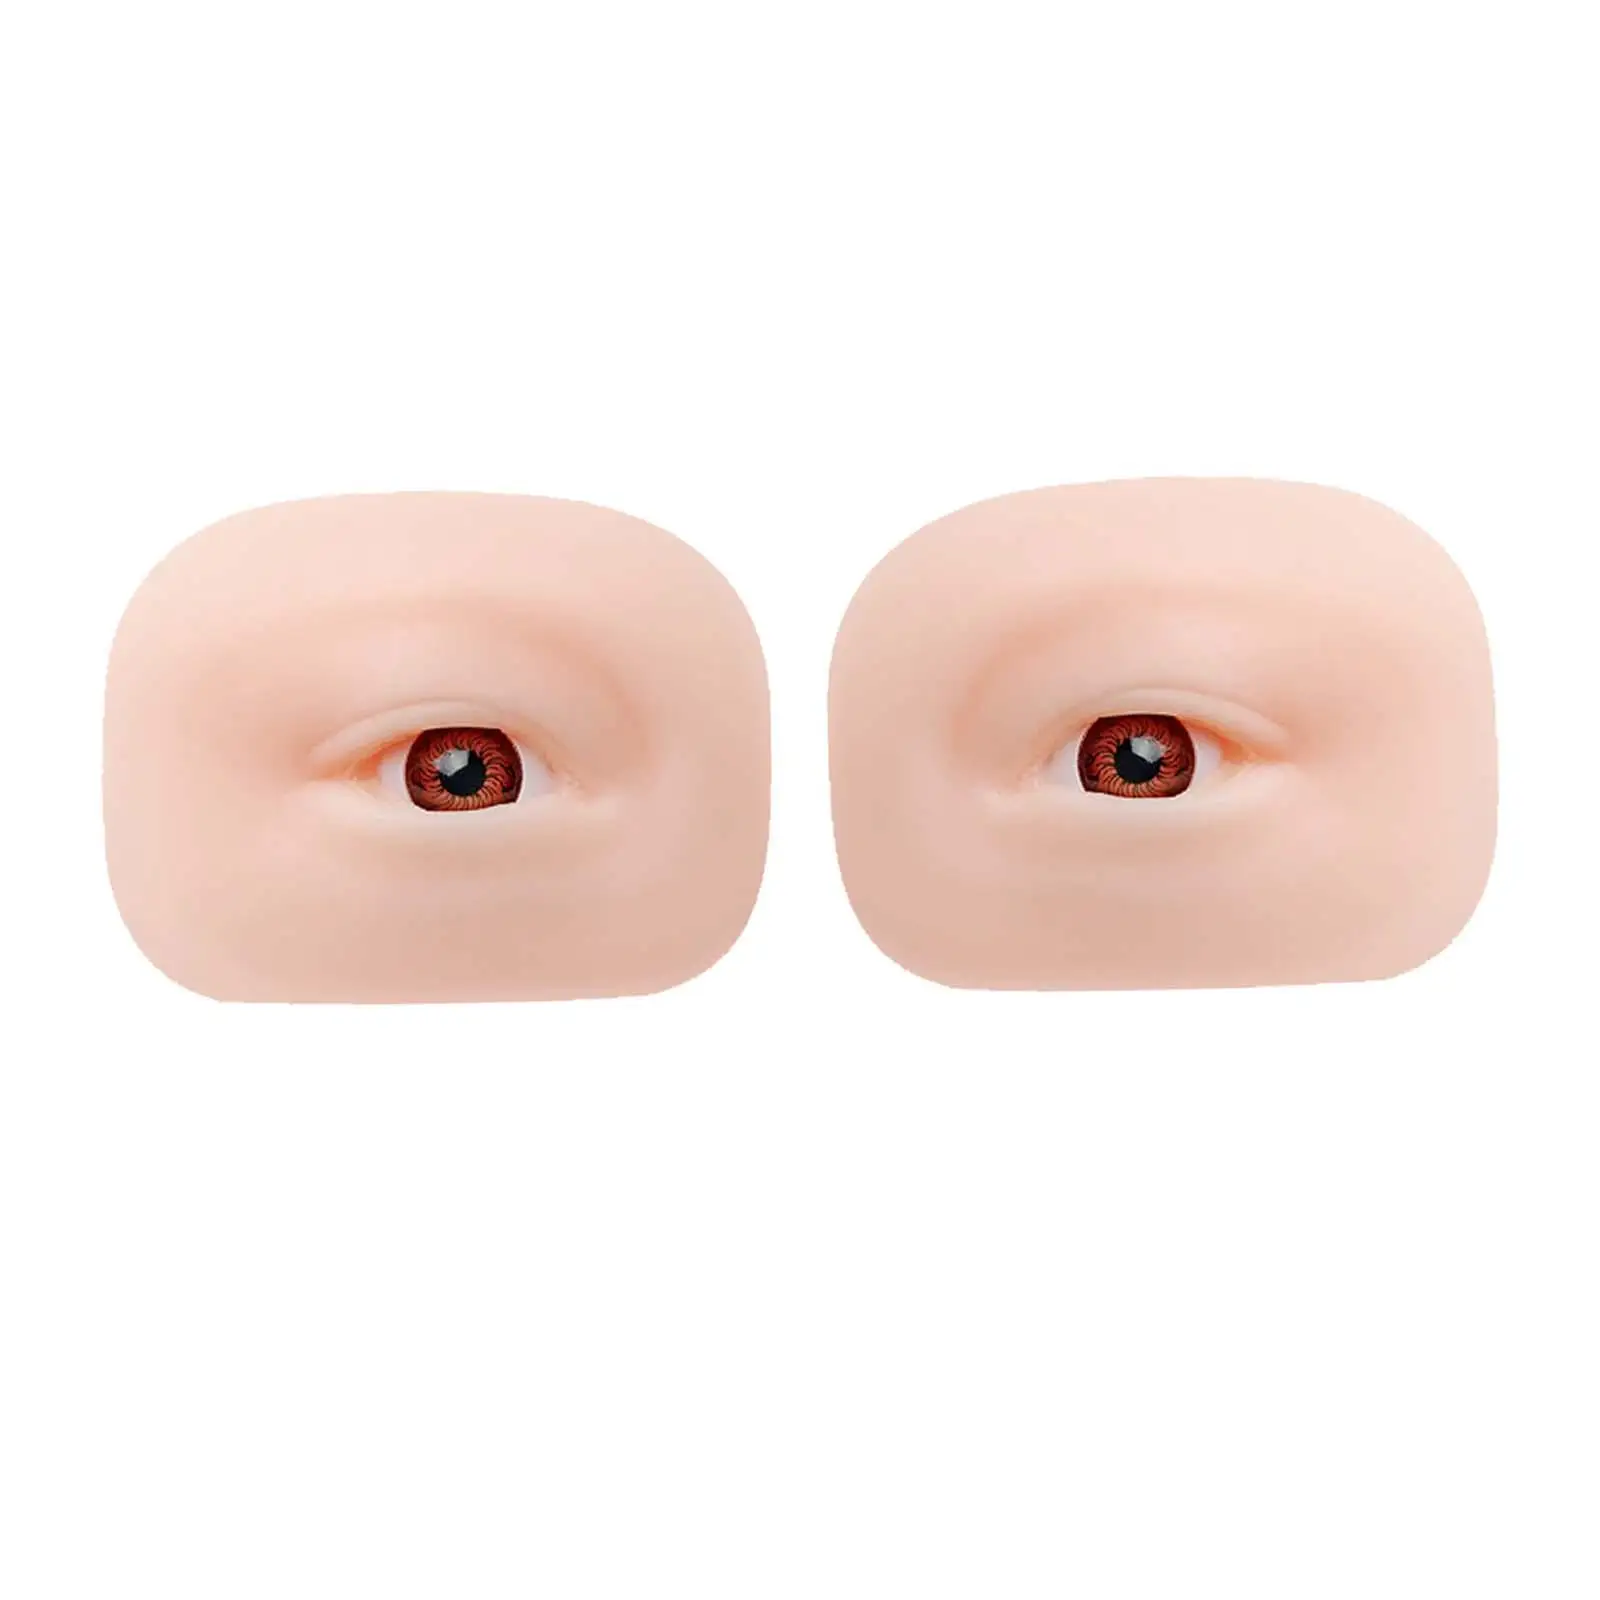 5D Silicone Eye Model Professional for Beauticians Starters Home Use